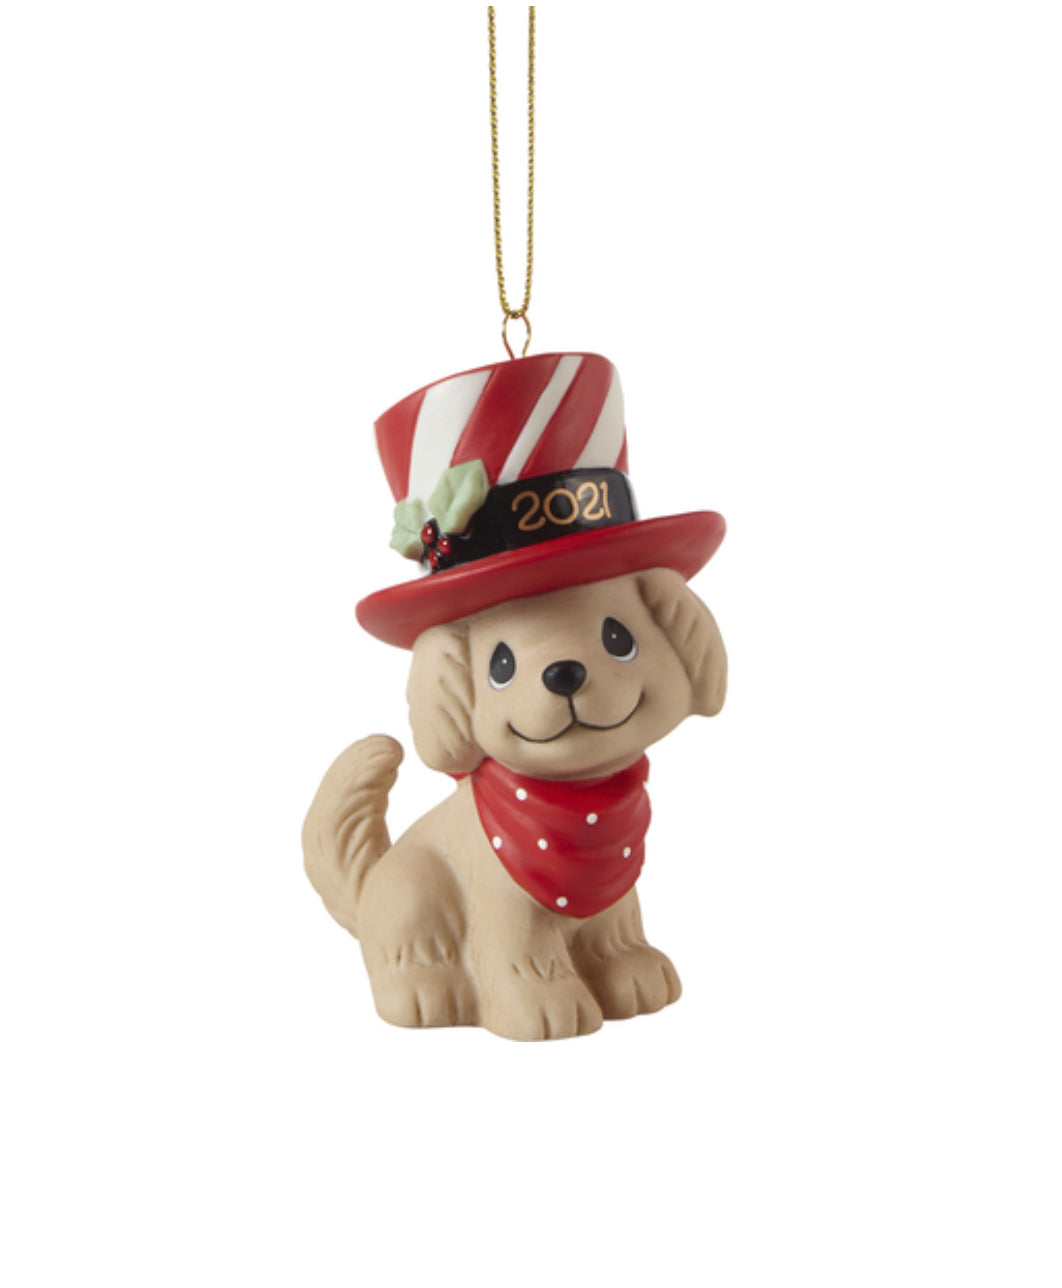 We Woof You A Merry Christmas  - 2021 Dated Annual Precious Moment Ornament